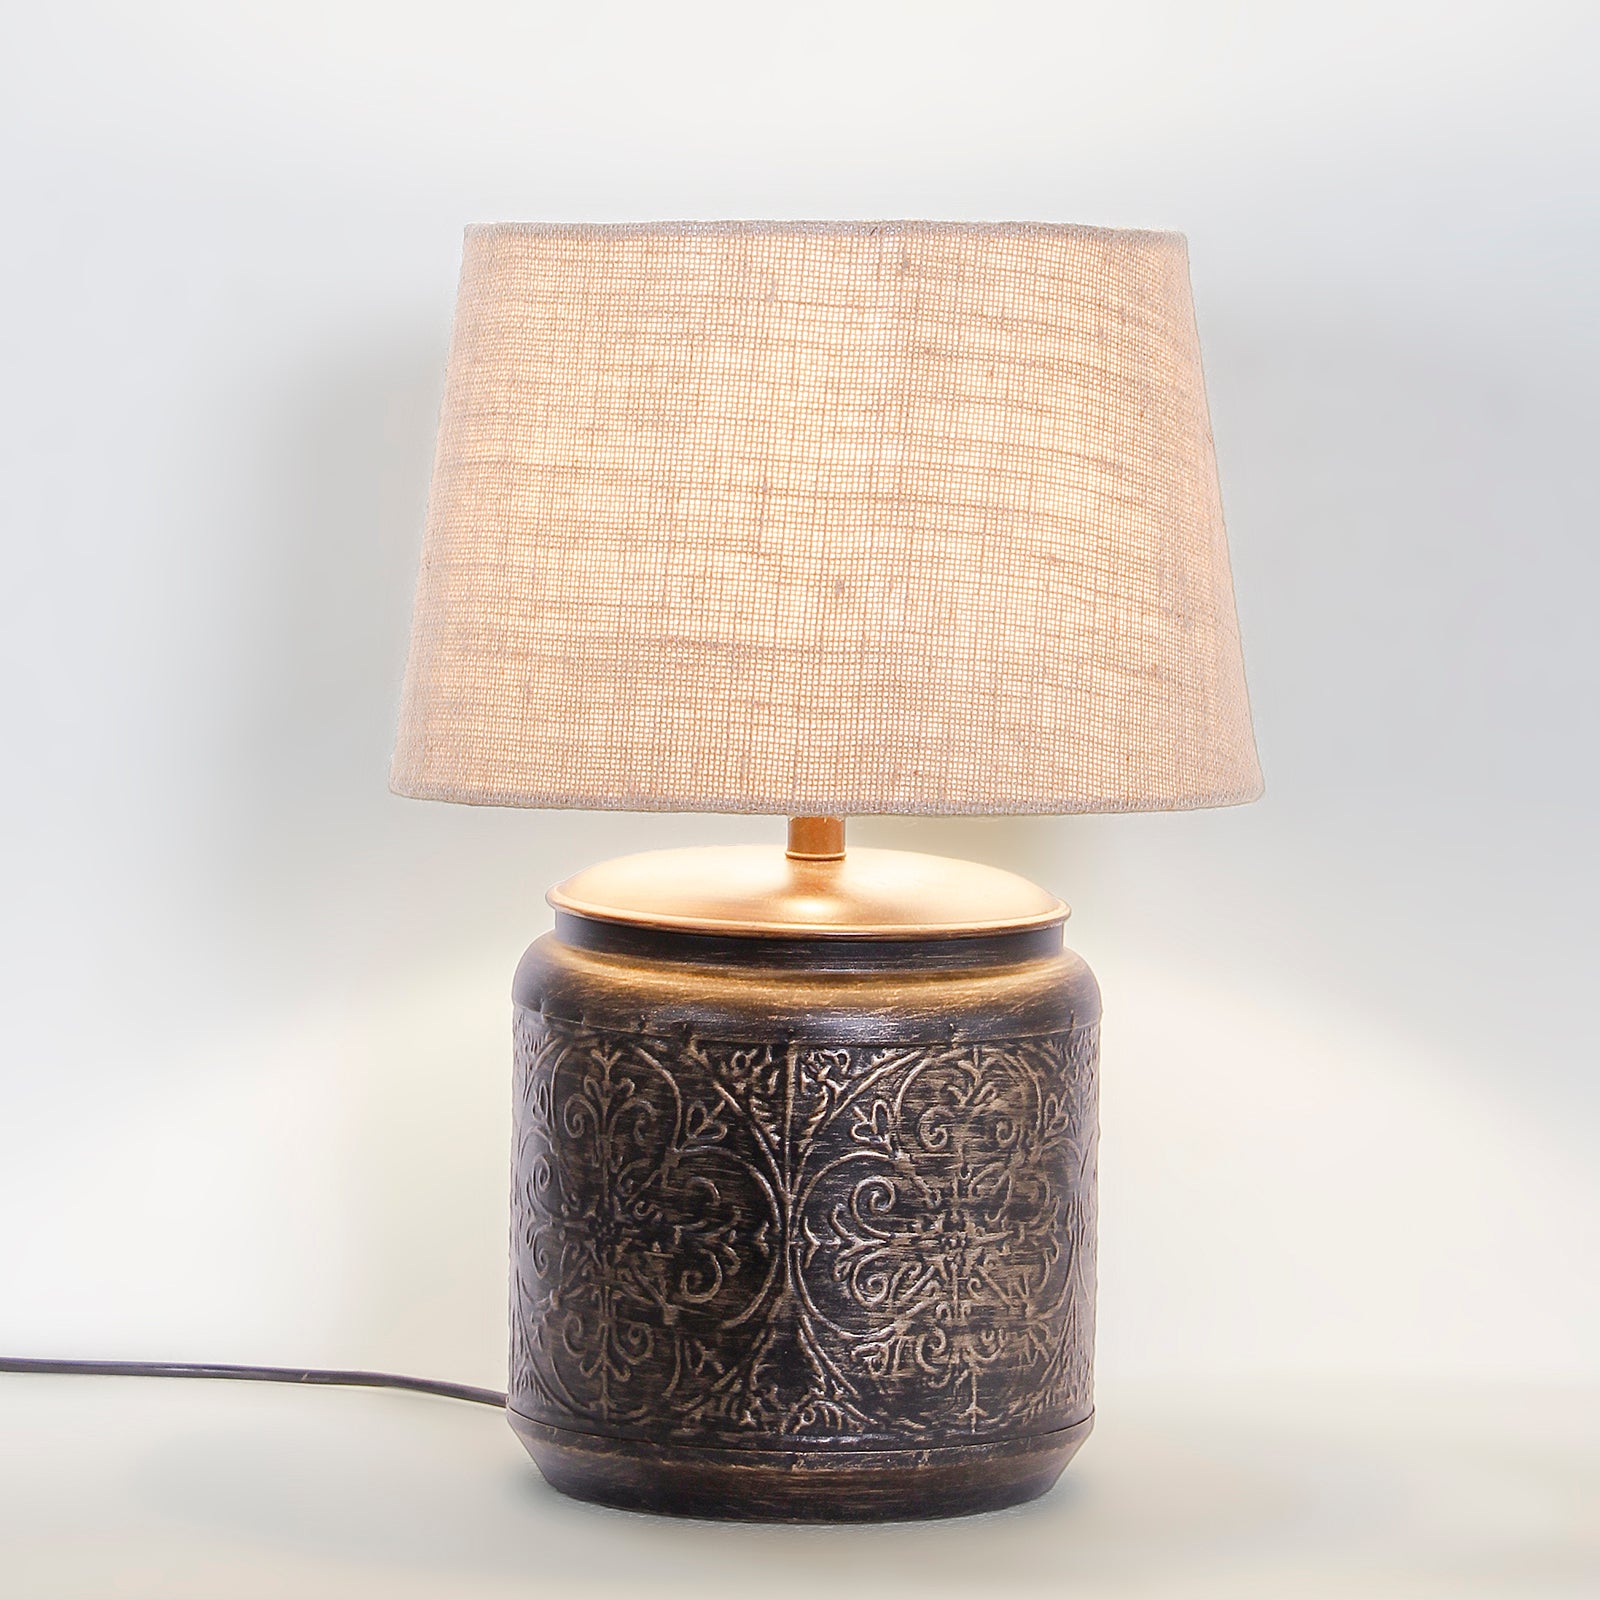 Creote Table Lamp online india